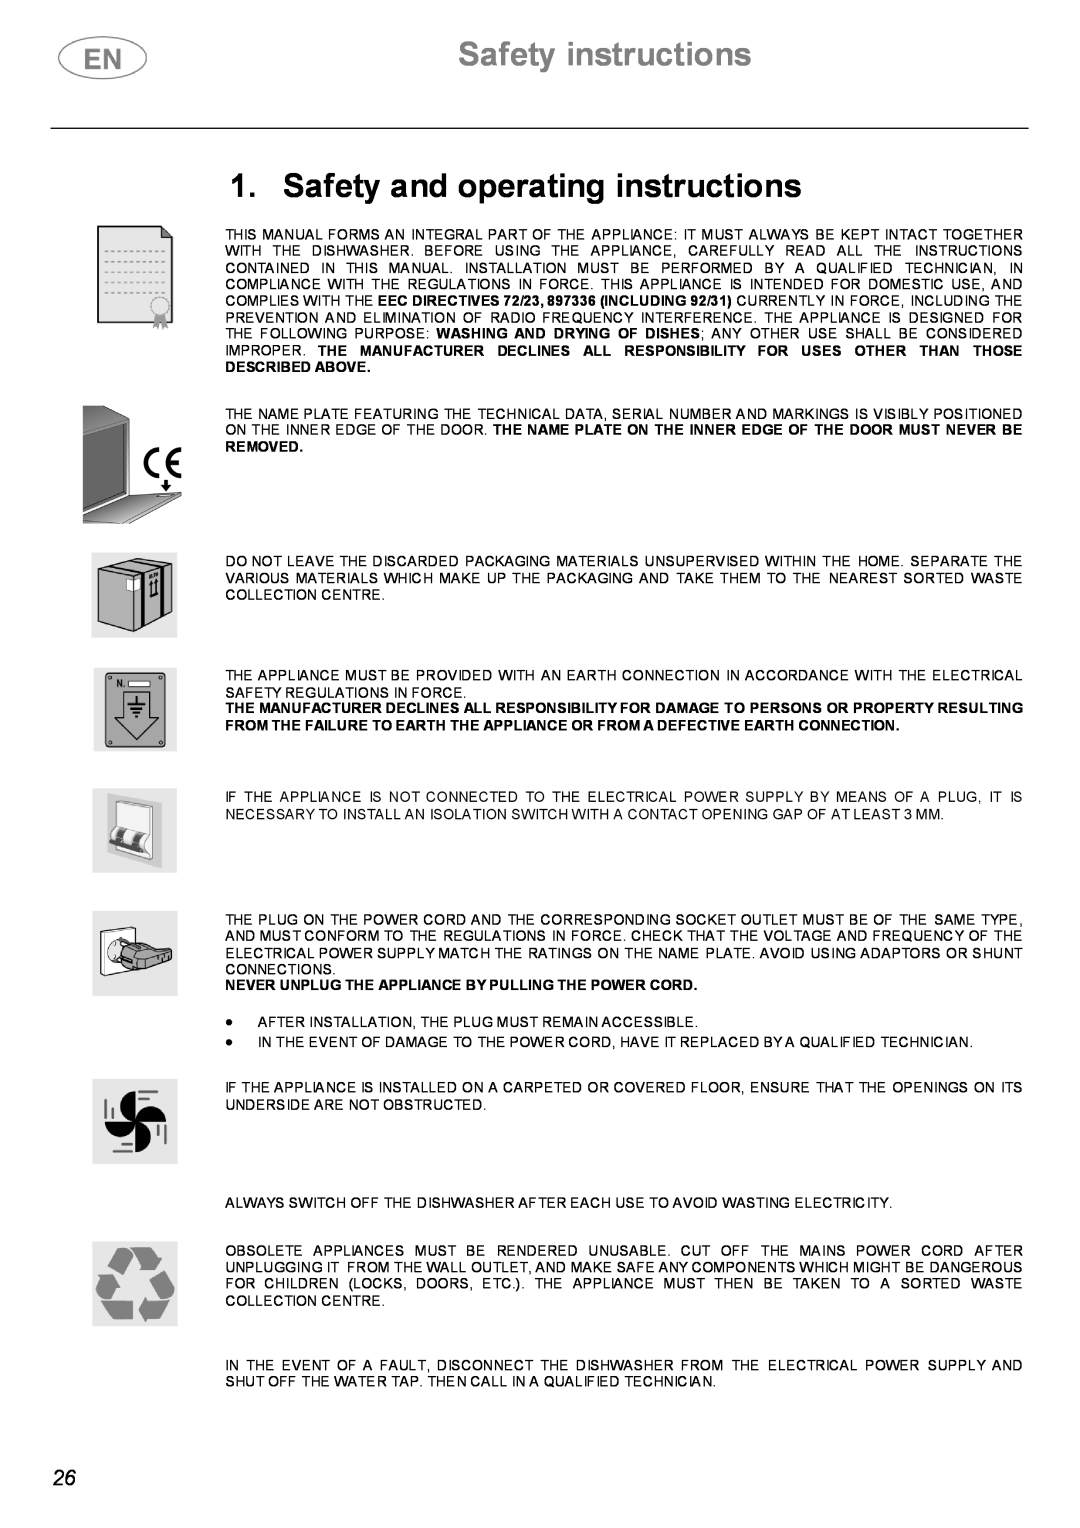 Smeg PL19K instruction manual Safety instructions, Safety and operating instructions, Described Above, Removed 